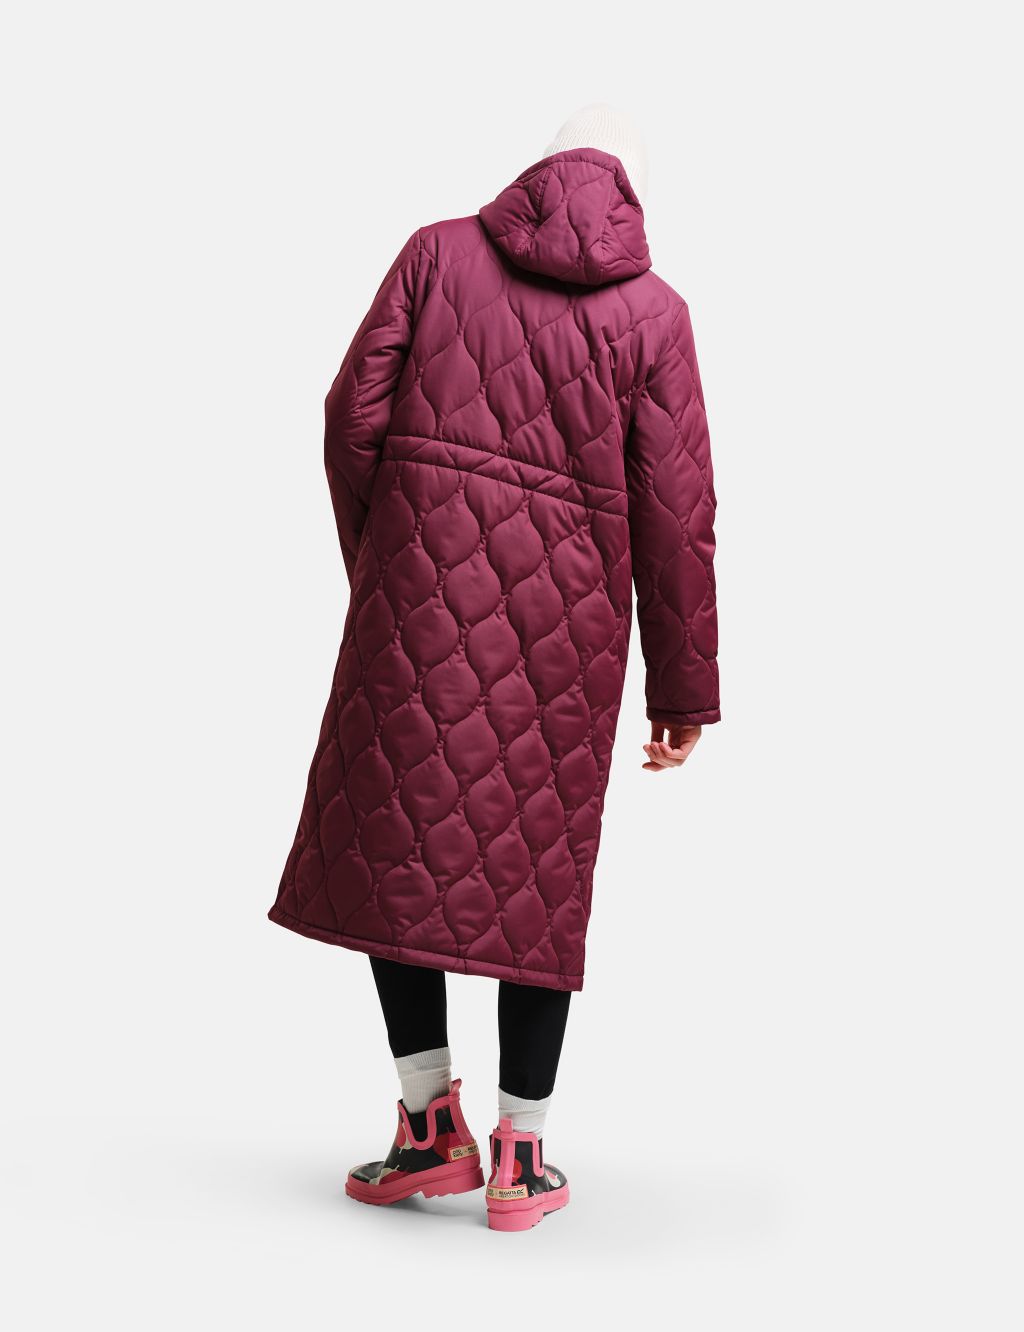 Orla Kiely Quilted Water-Repellent Longline Coat image 3